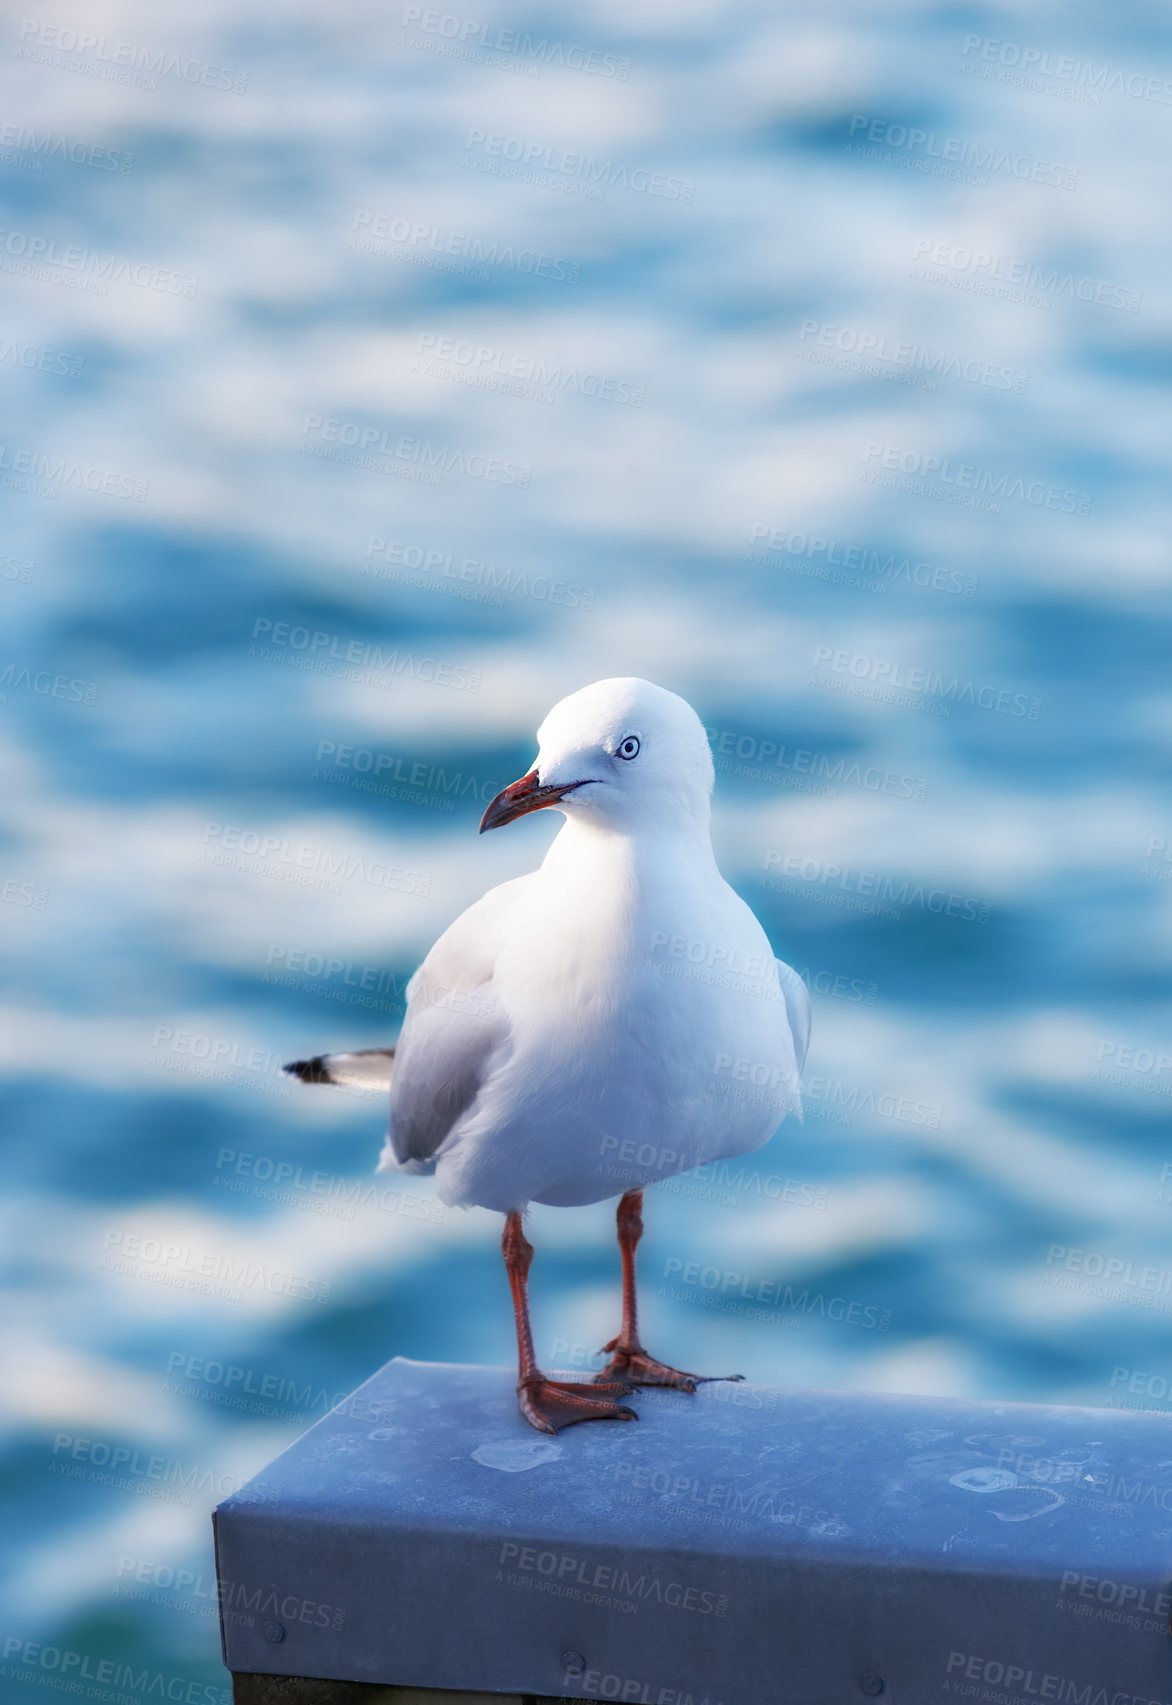 Buy stock photo A hungry red billed seagull perched on a rail looking for fish in its seaside habitat. A bird in its habitat and environment looking to the side outdoors in nature at a pier or dock on a summer day